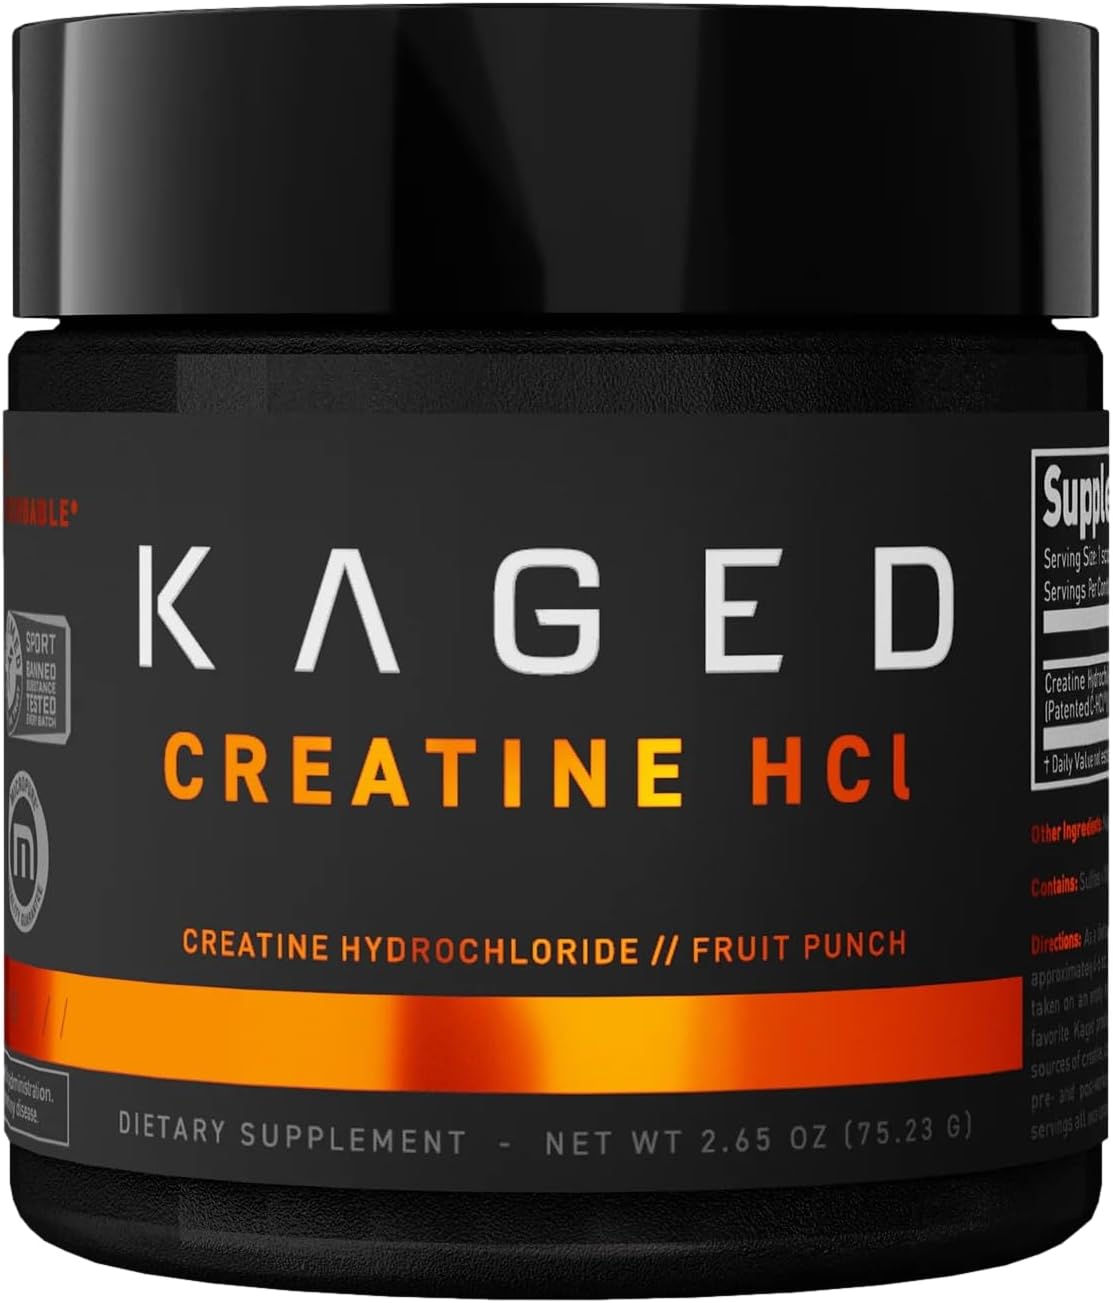 Kaged Creatine HCl Powder Fruit Punch Supports Muscle Growth and Recovery Patented Creatine Hydrochloride Formula Easy Digestion and Enhanced Muscle Absorption 75 Servings